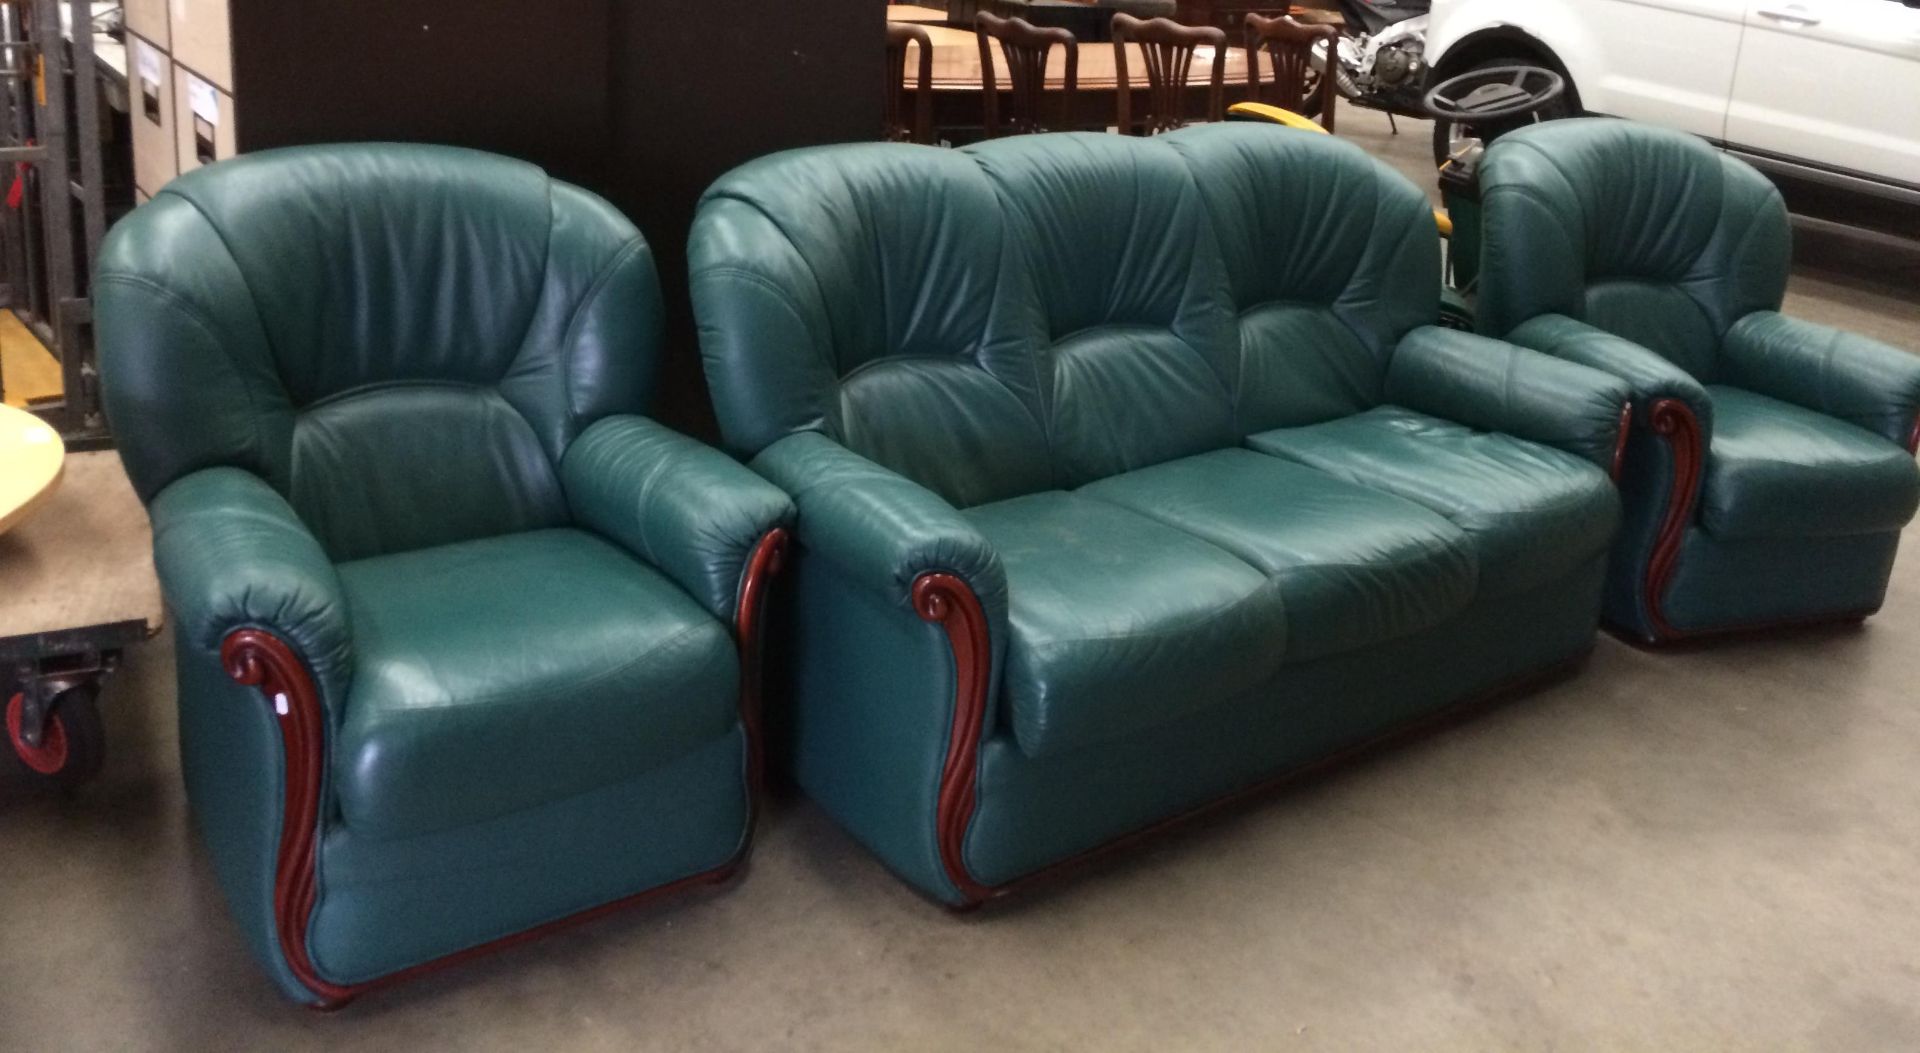 A MF International Italian green leather three piece suite with wood trim (with fire labels)